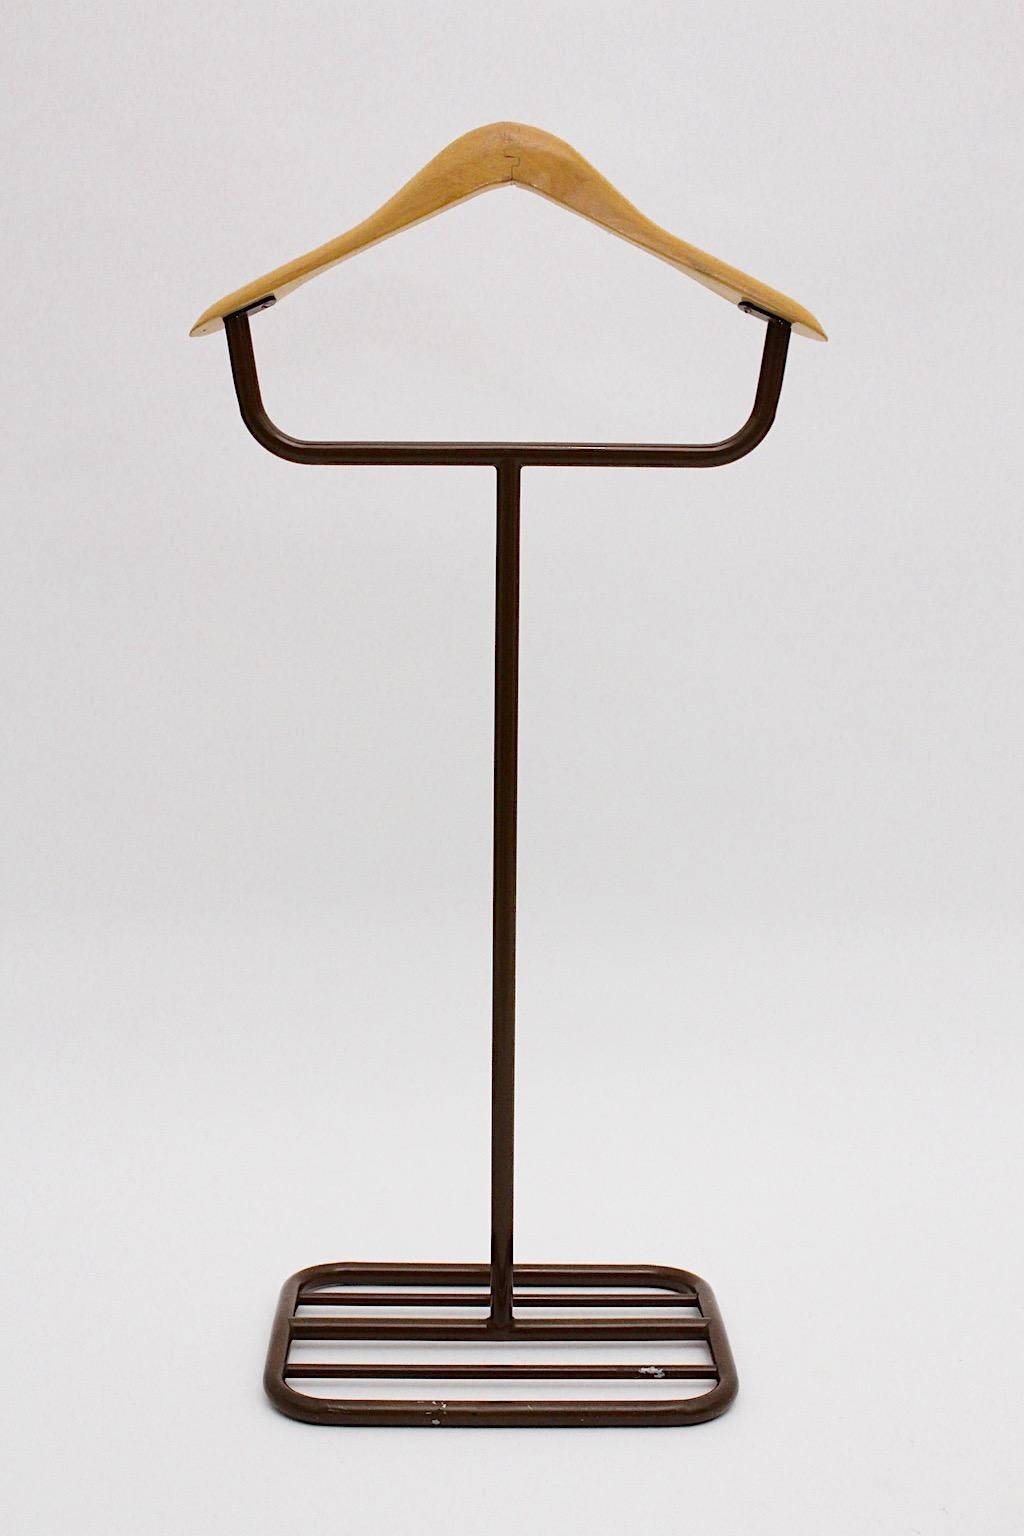 Brown vintage Bauhaus valet or coat rack from metal and beech designed and manufactured 1930s.
A wonderful valet with a beech hanger and a brown lacquered metal construction with a squared base.
Throughout its plain look and feel the valet is very